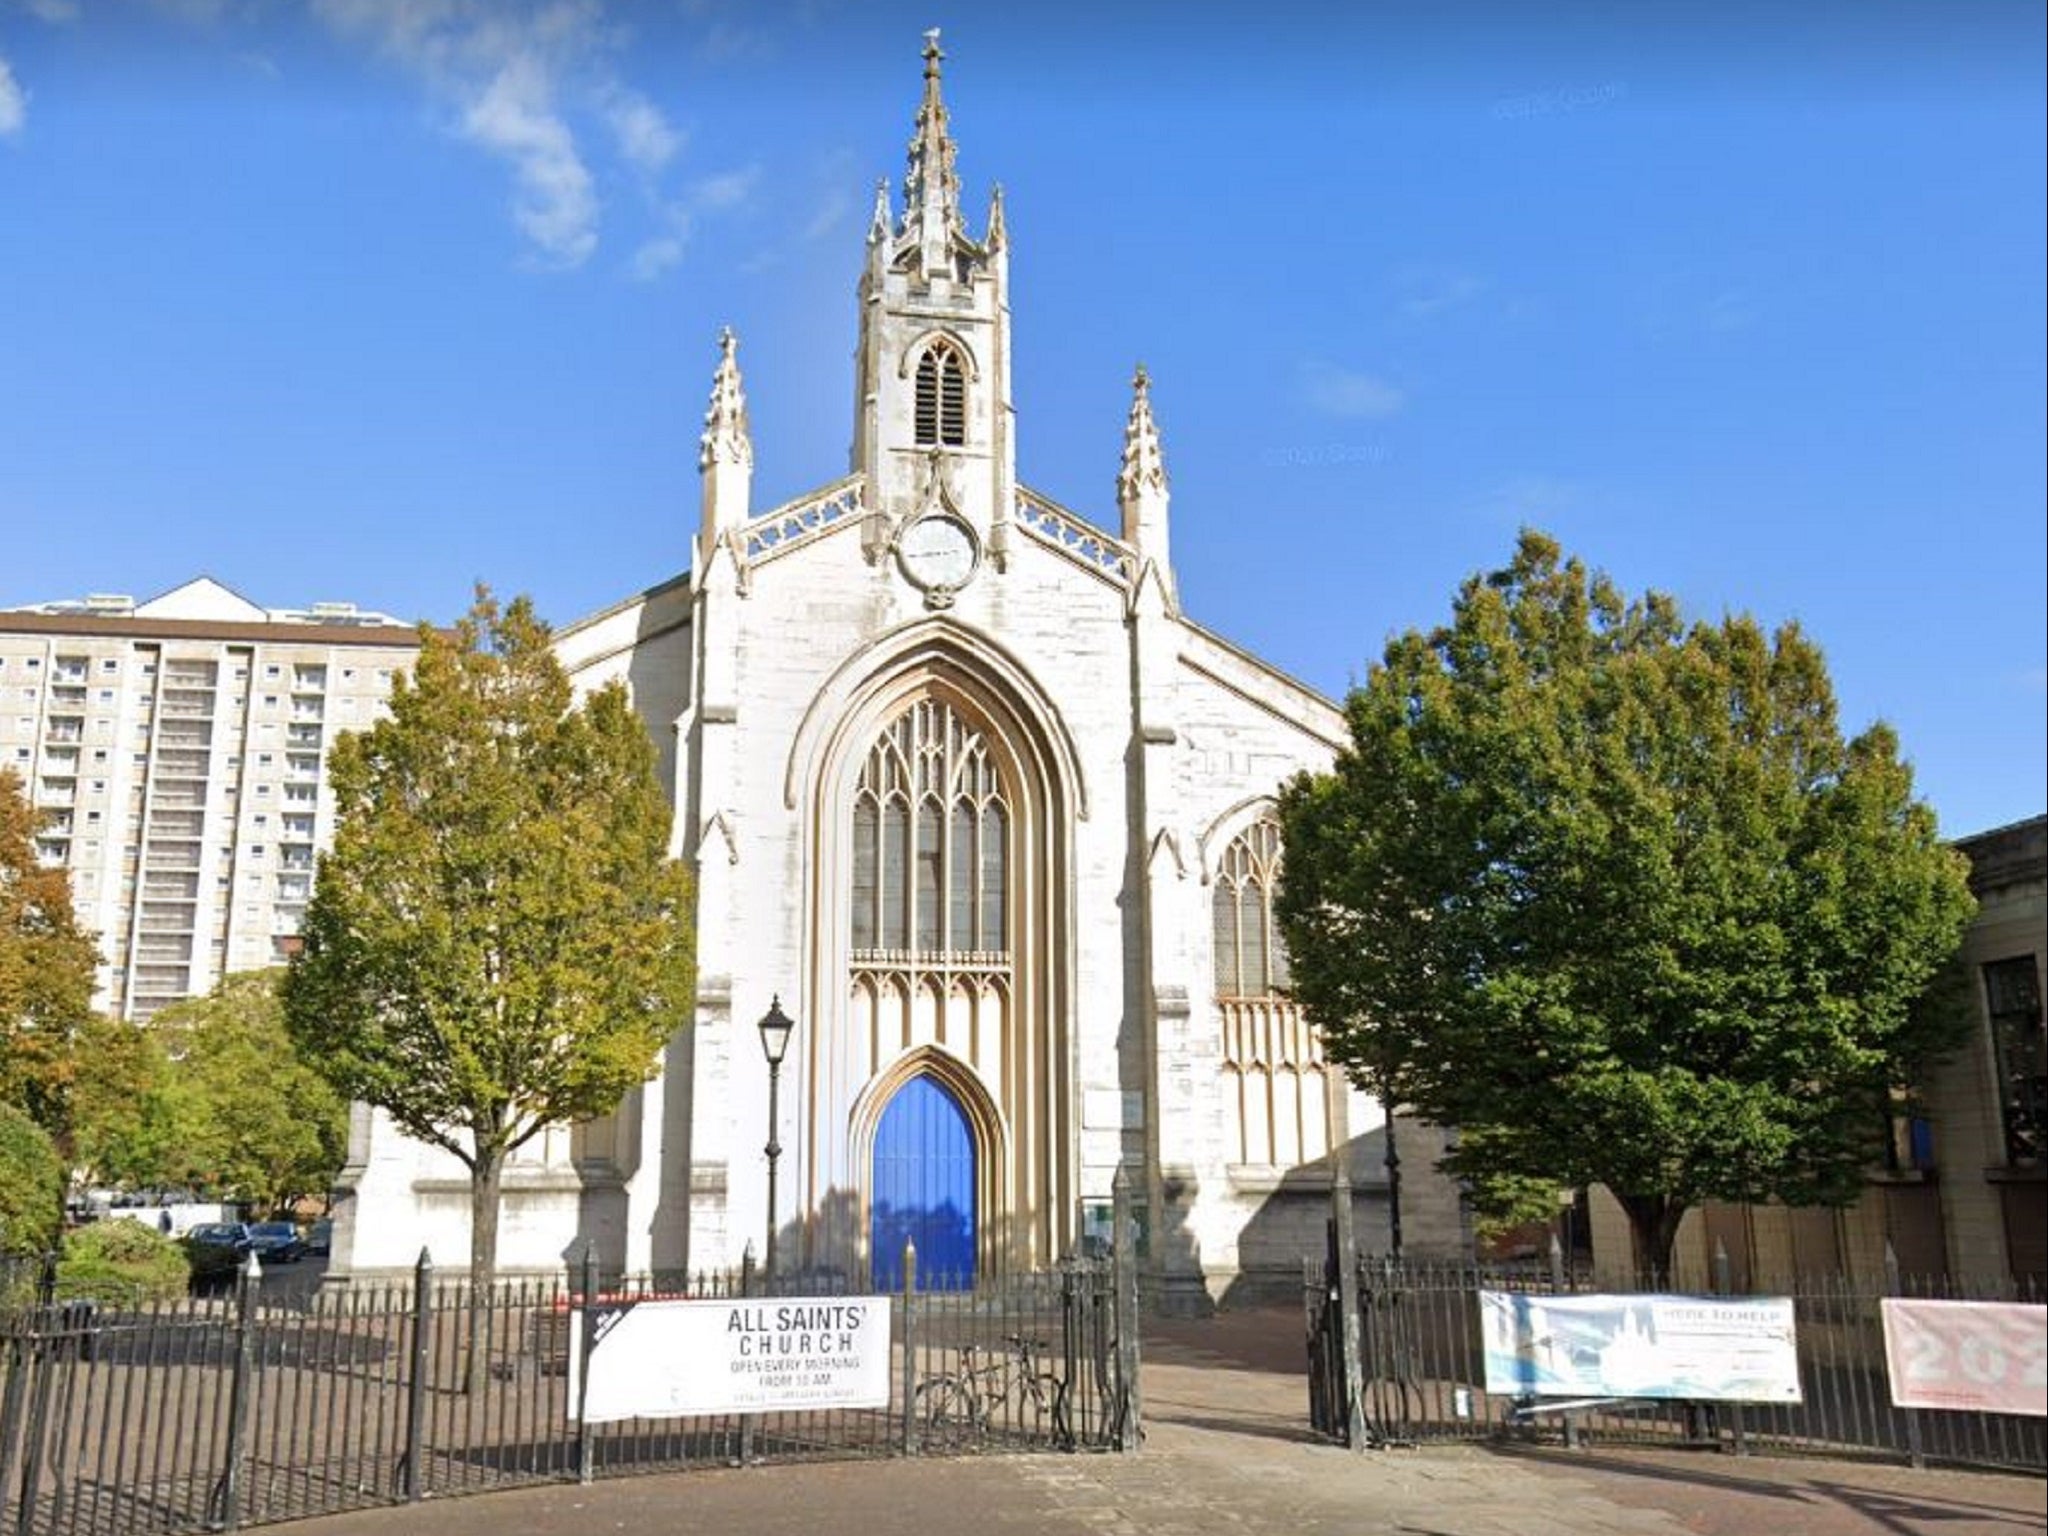 A former choirmaster at All Saints Church in Portsmouth has been convicted of sexually abusing 13 children